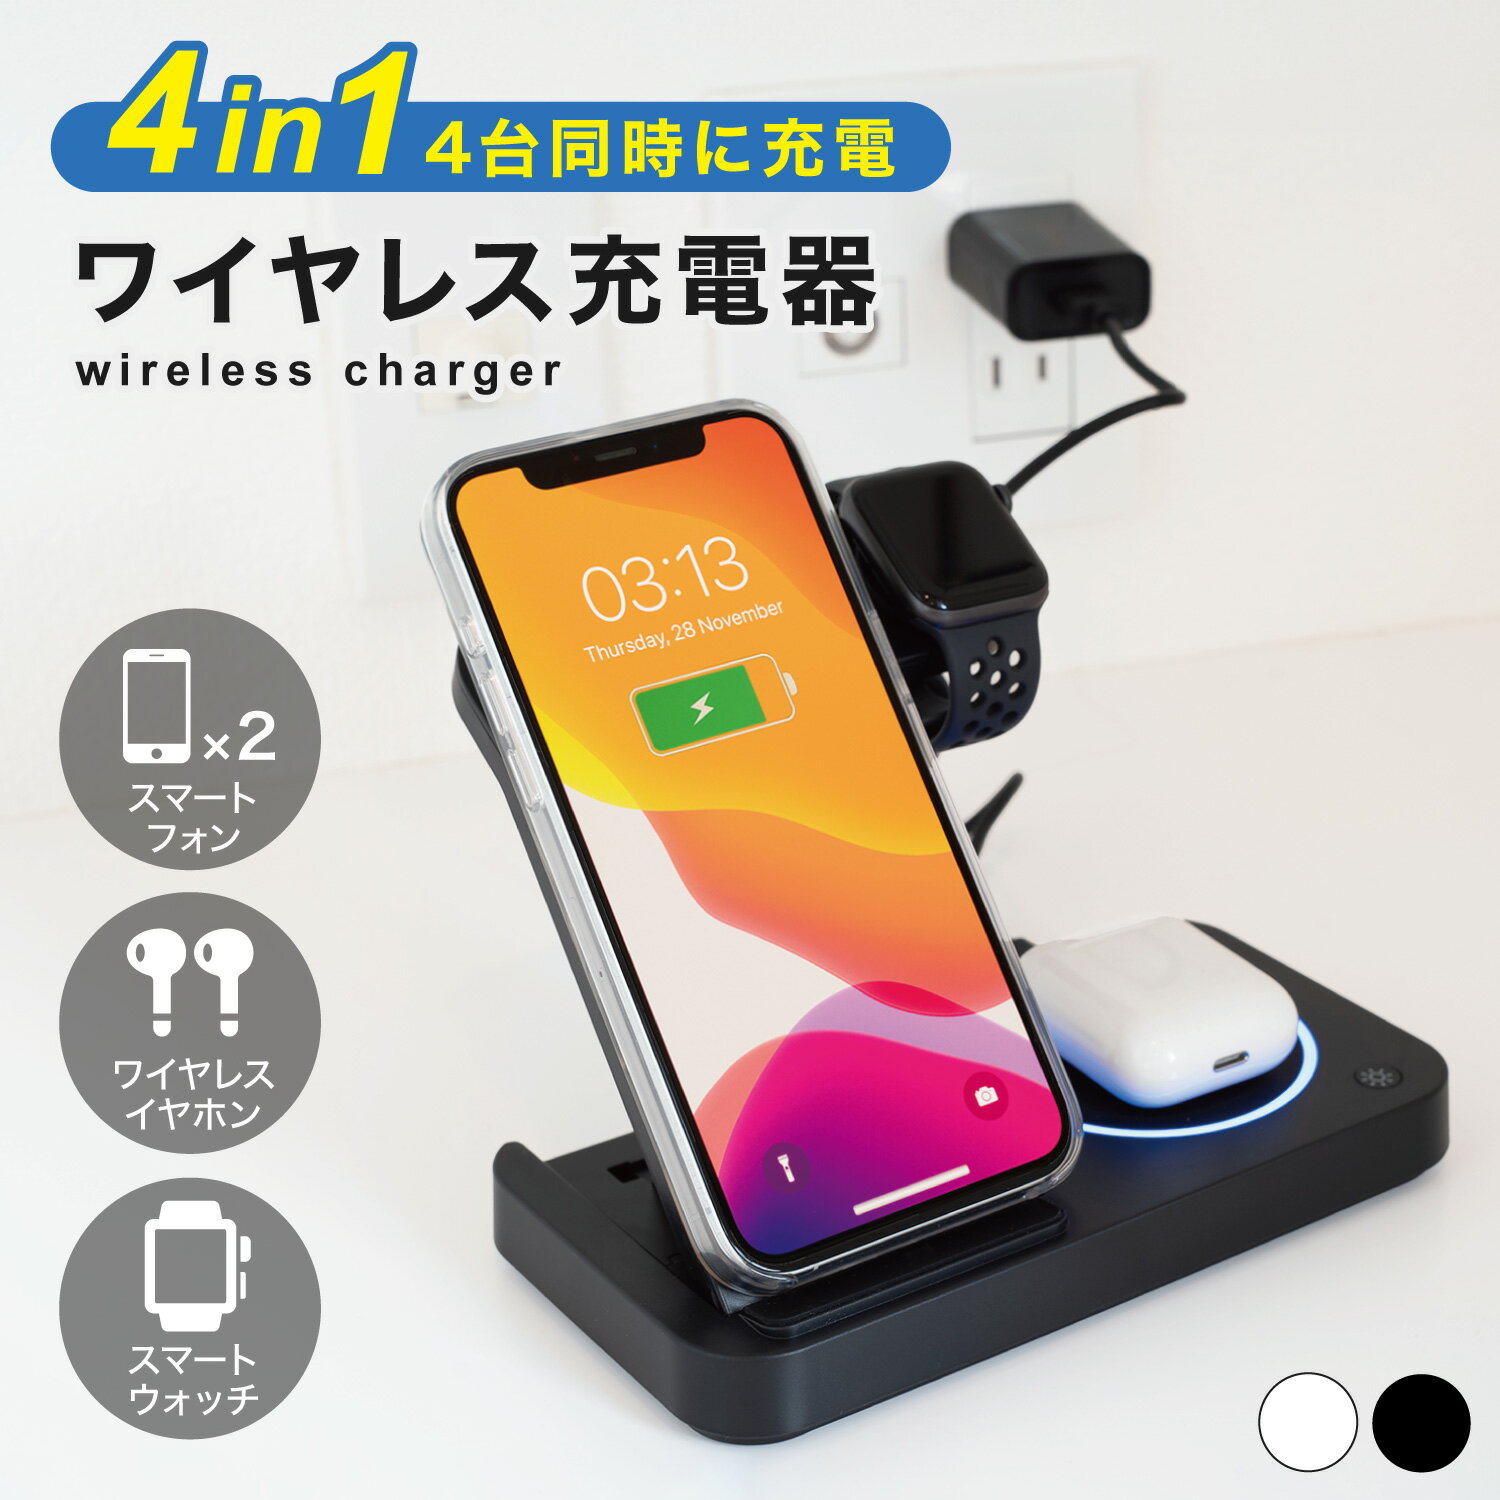  3in1Ȃ4in1!!   CX[d _LO1 ^ 4䓯ɏ[d\I 4in1 iPhone CX [d  ōŒZ 15W }[d CX[dX^h Apple Watch[d 18WA_v^[t [dPSEF؍ QiX}z@SΉ